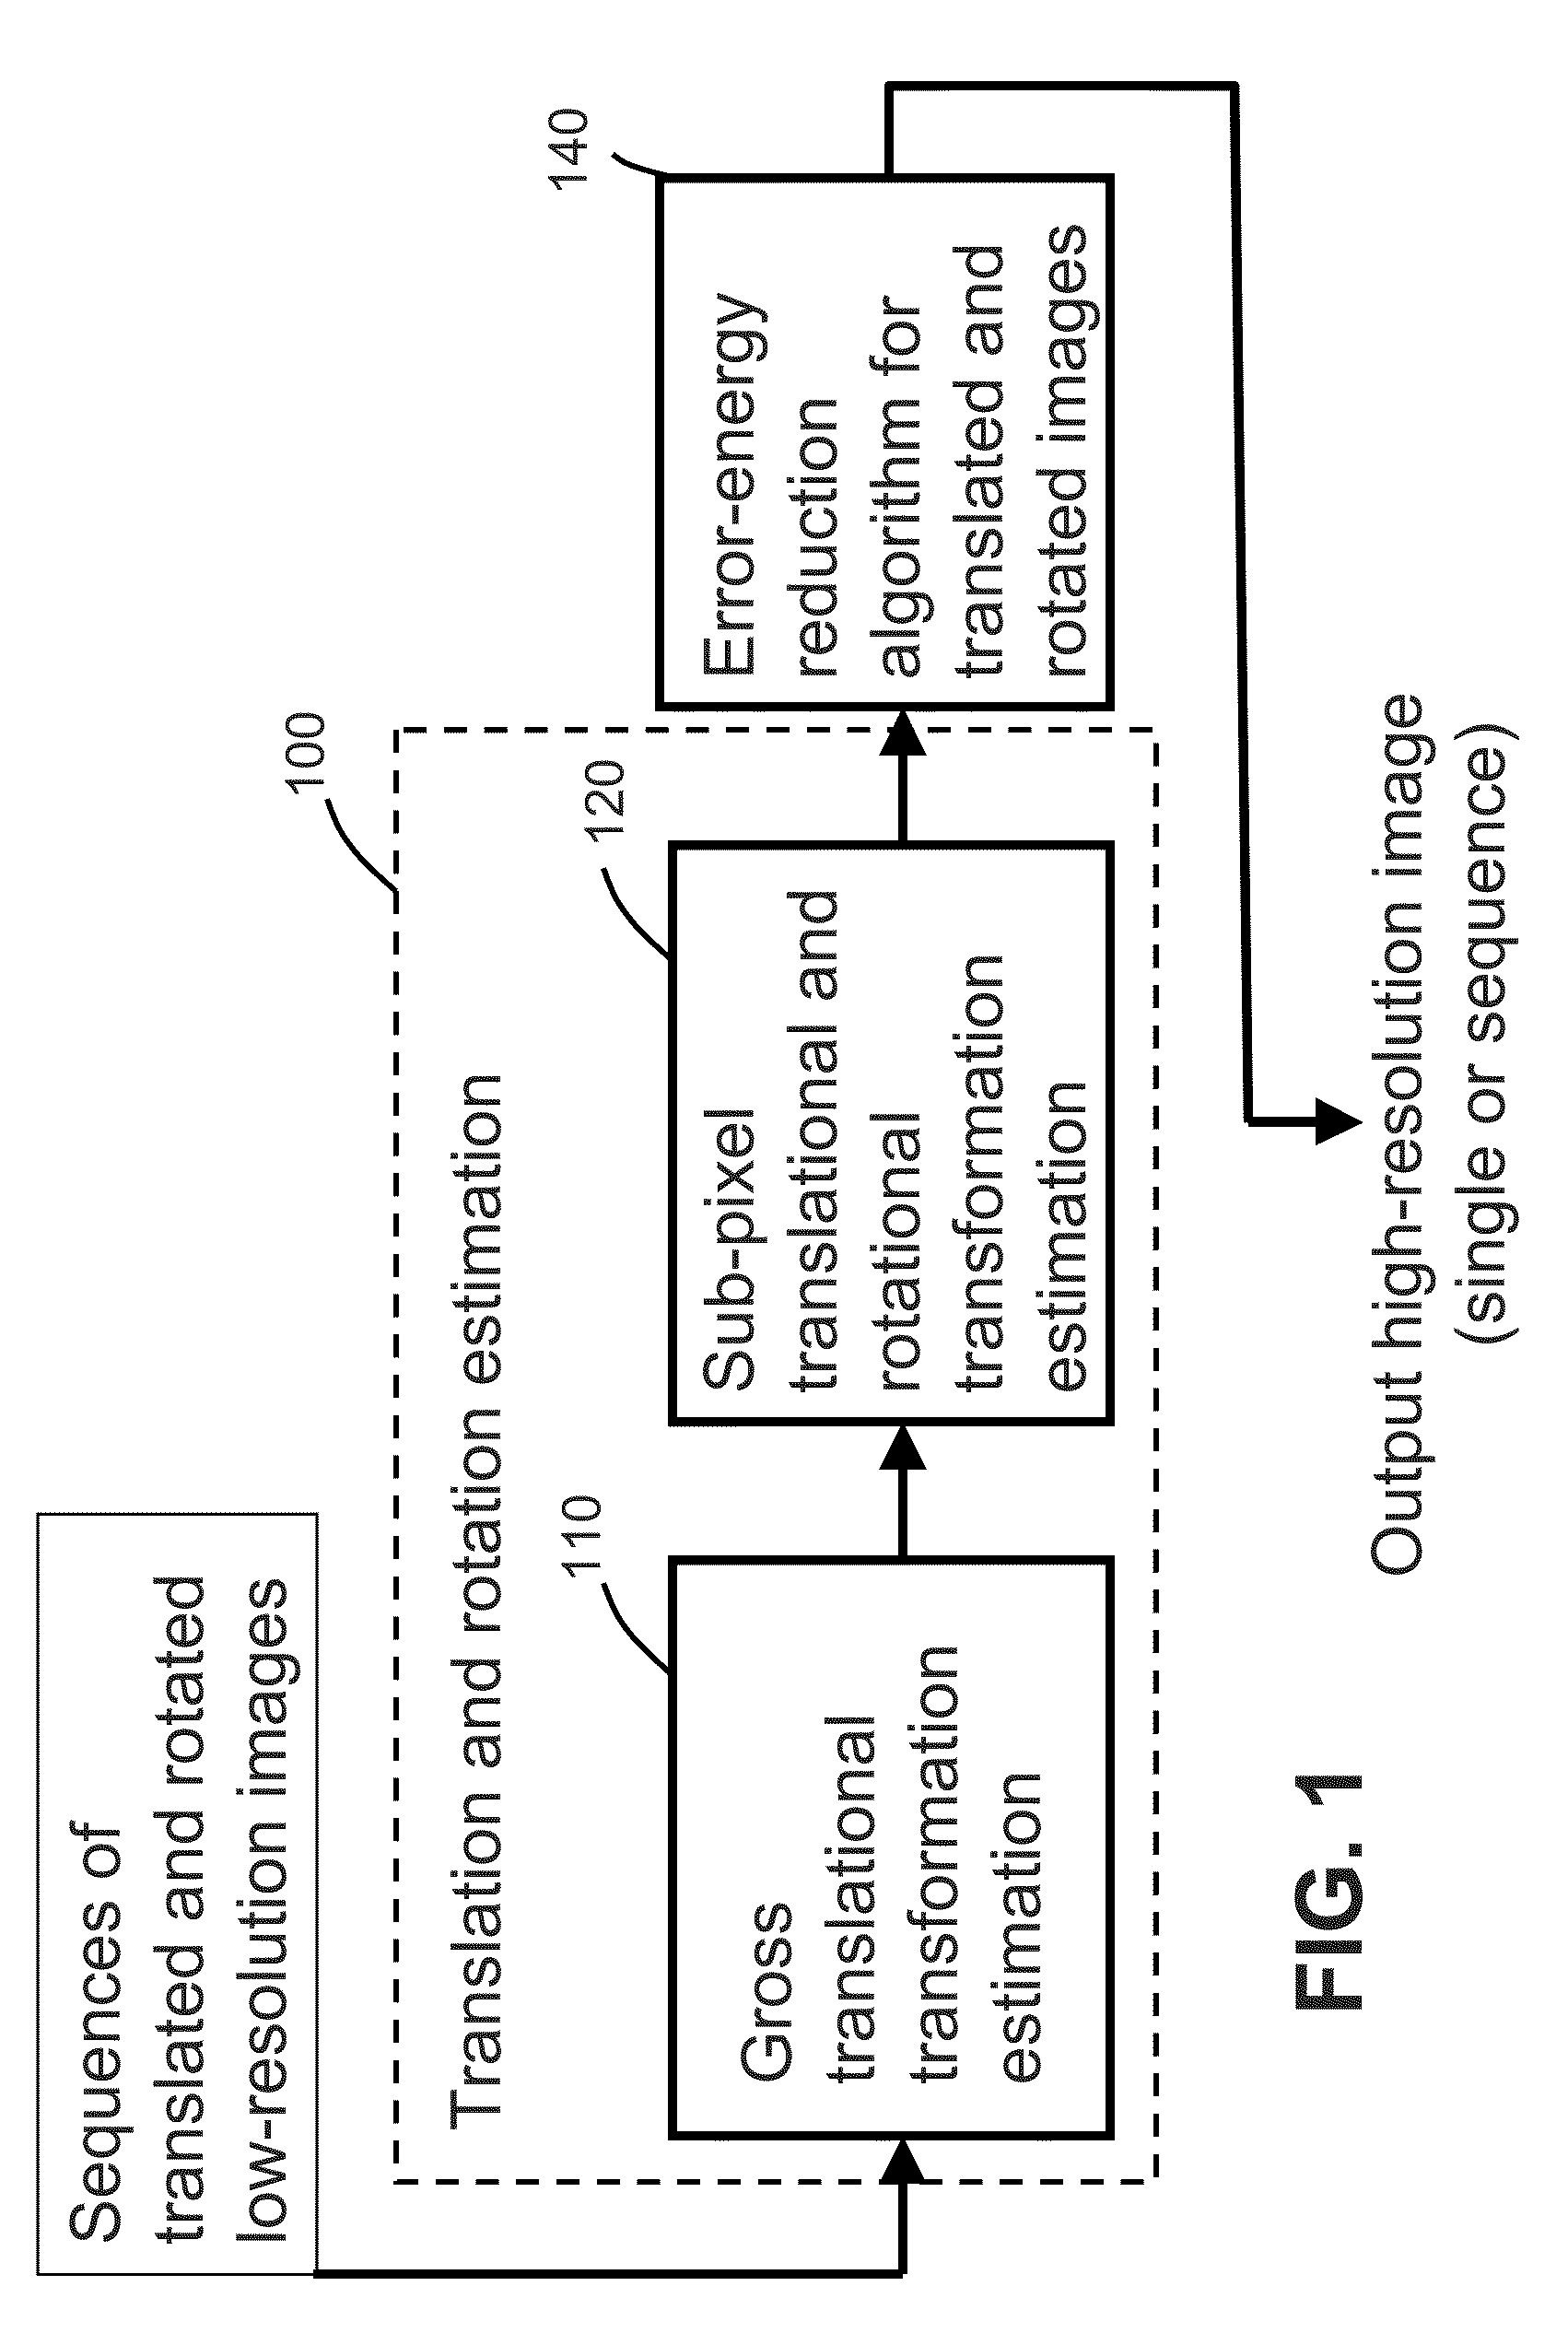 System and method of super-resolution imaging from a sequence of translated and rotated low-resolution images